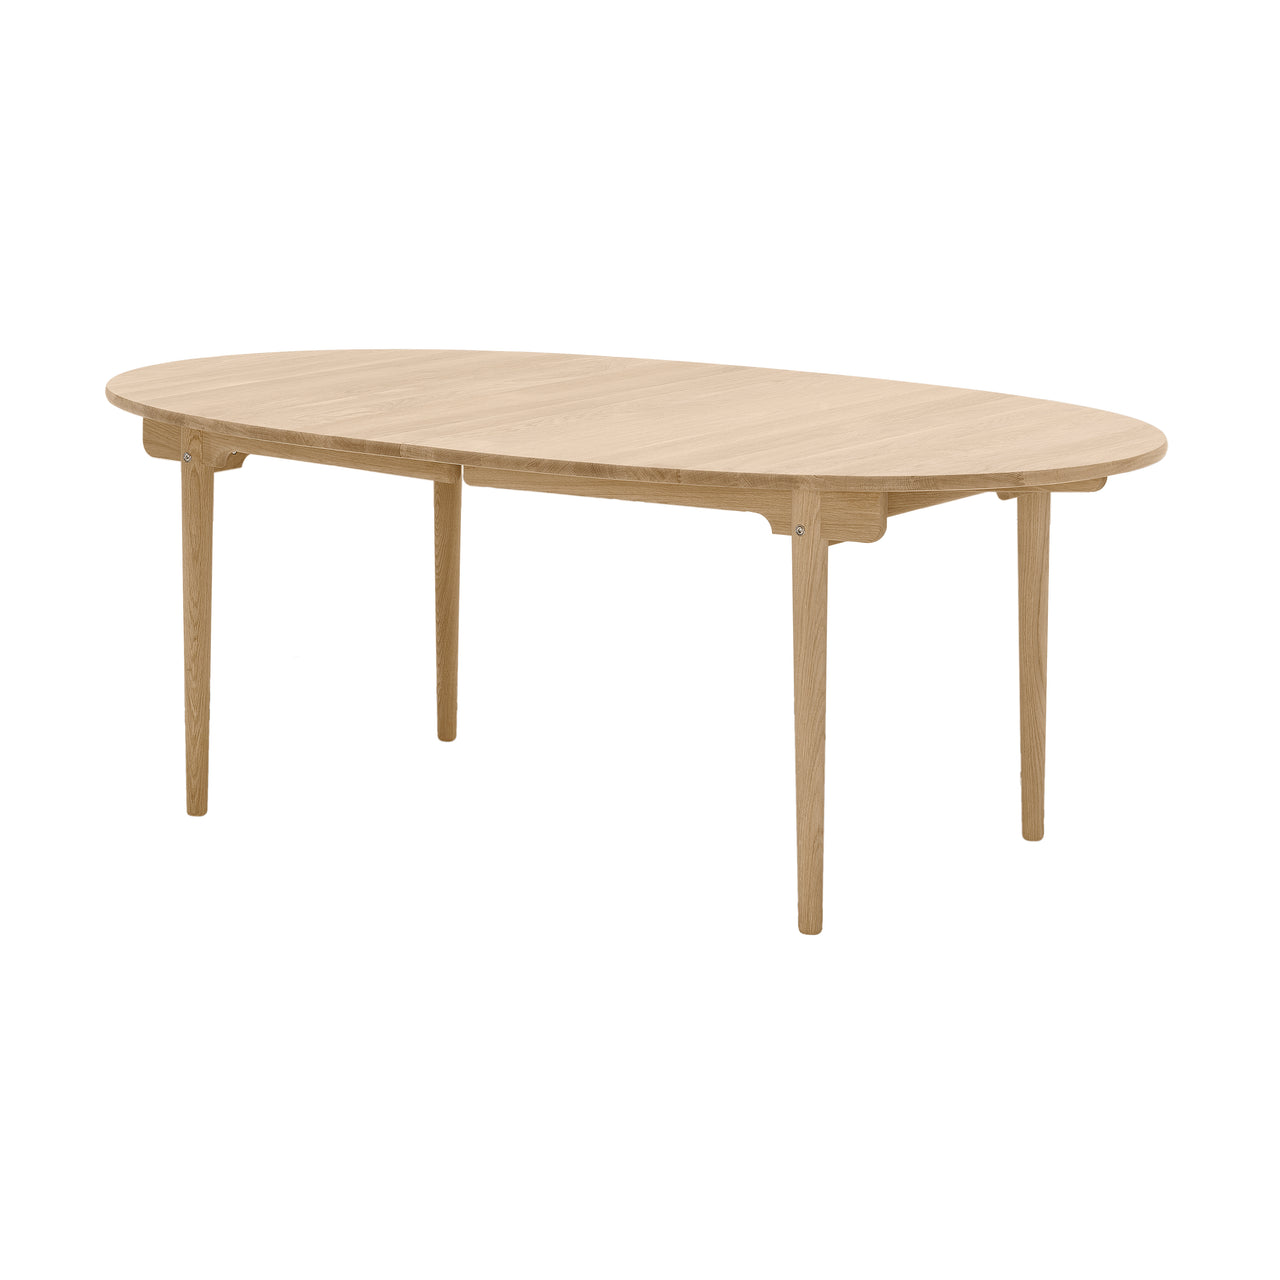 CH338 Dining Table: Oiled Oak